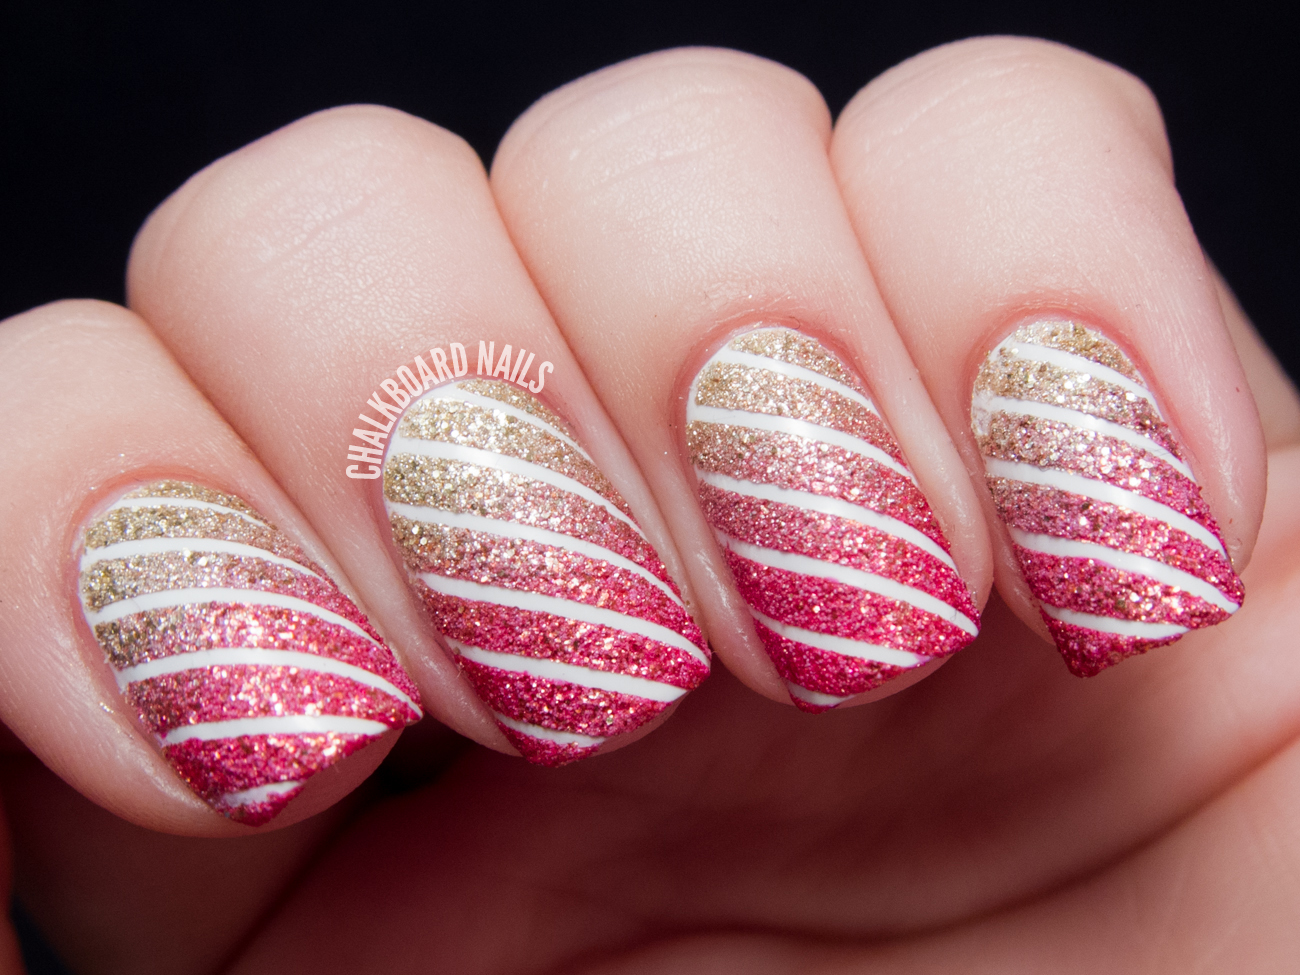 10. Simple White and Gold Striped Nail Design for Short Nails - wide 4